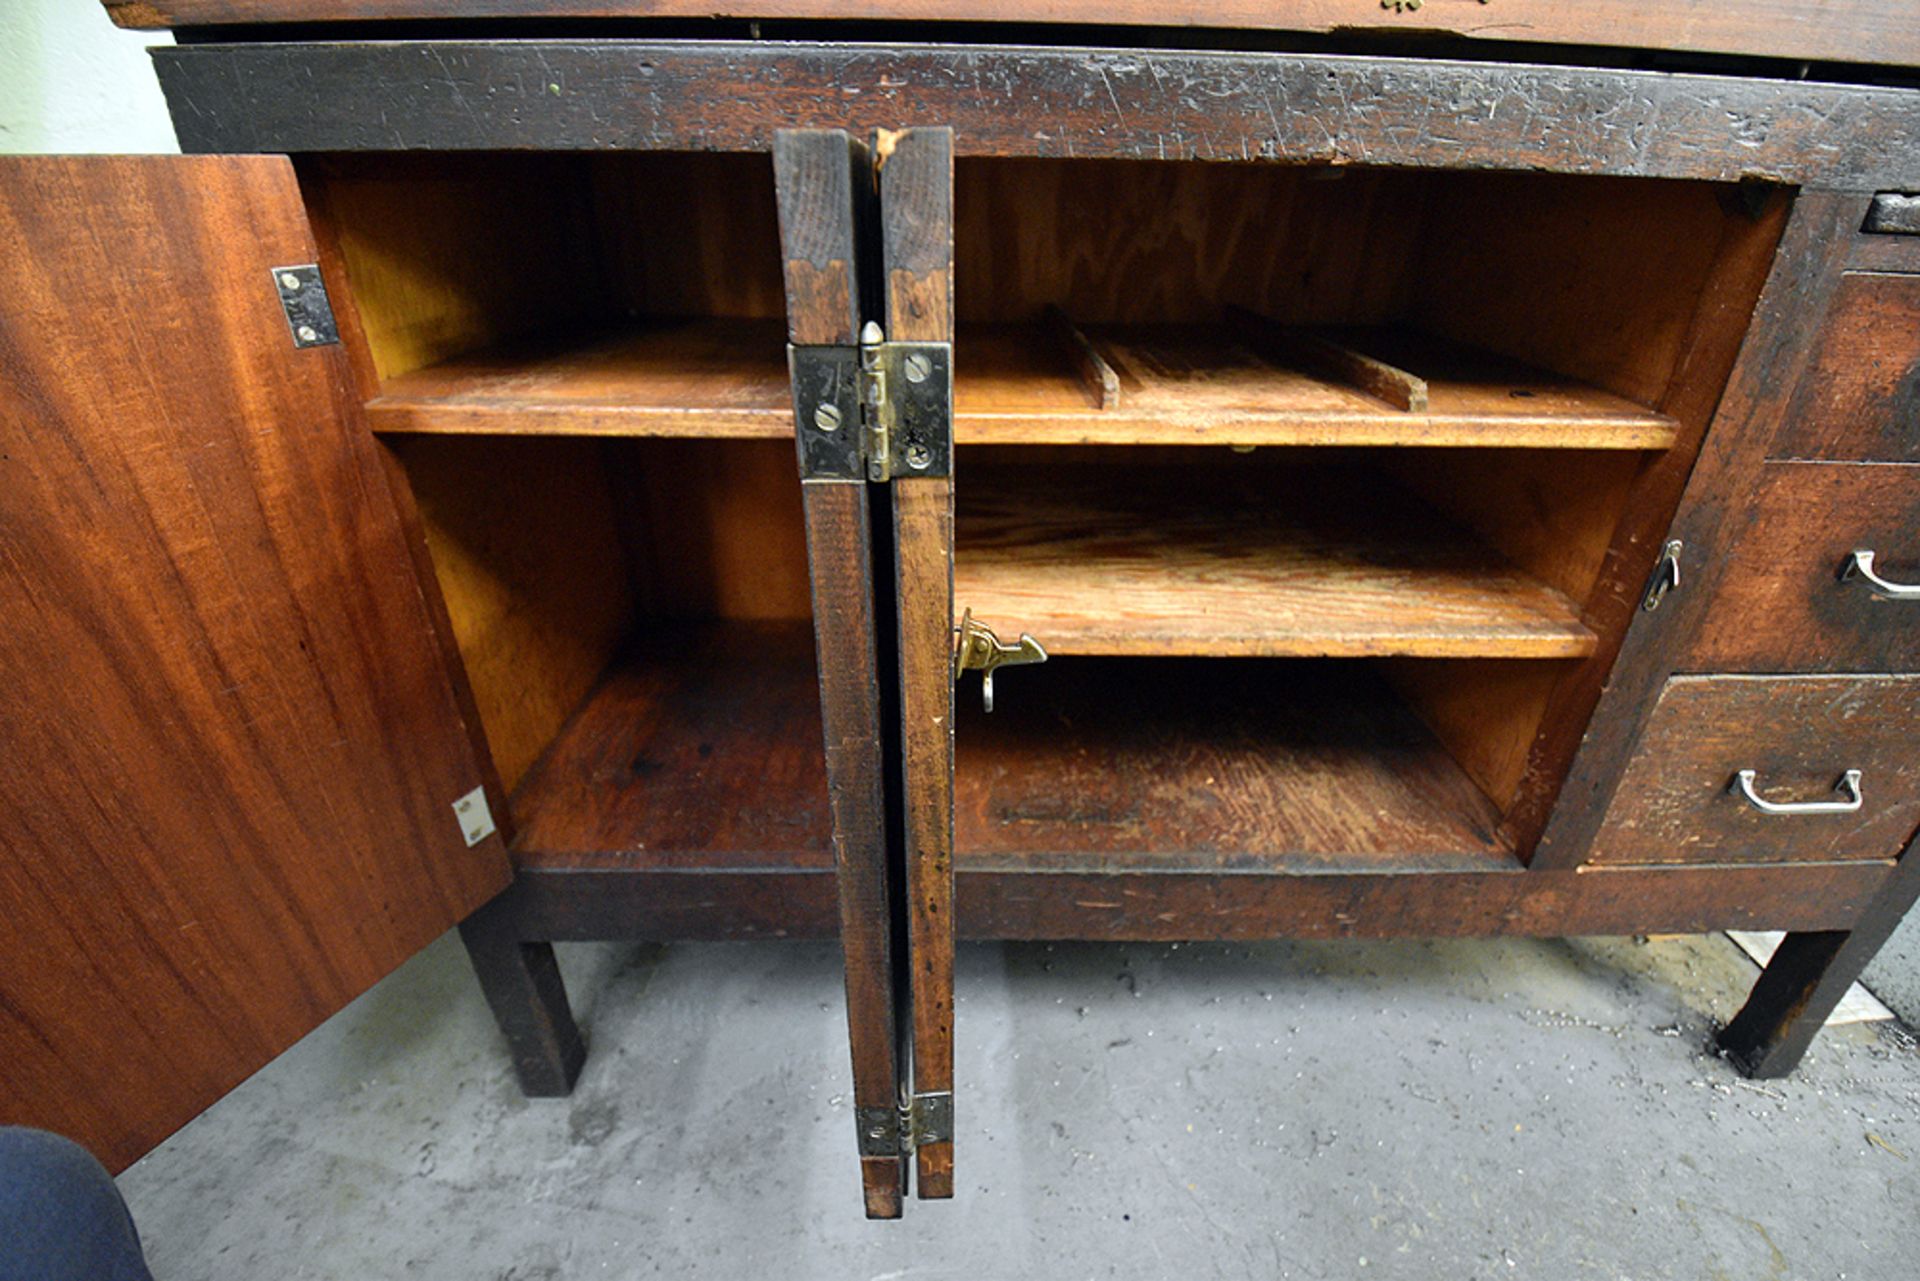 Wood Machinist Cabinet (48 1/2" x 43 1/2" x 18"D.) w/Contents - Image 6 of 6